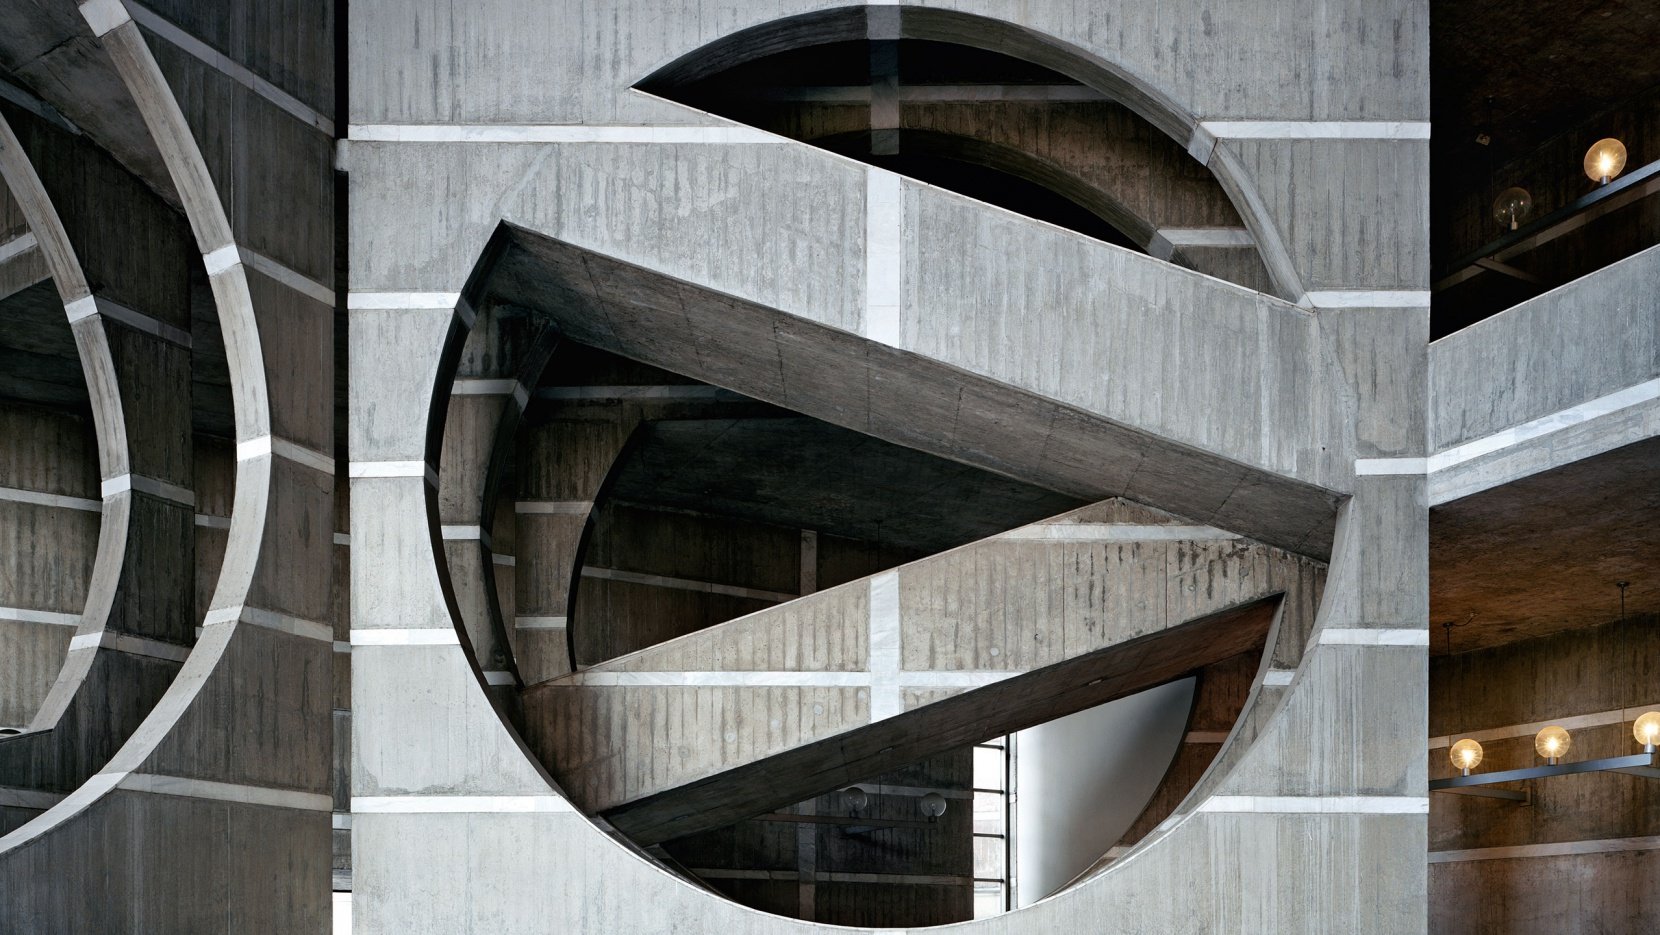 Concrete walls with large circle gaps surrounding staircases.